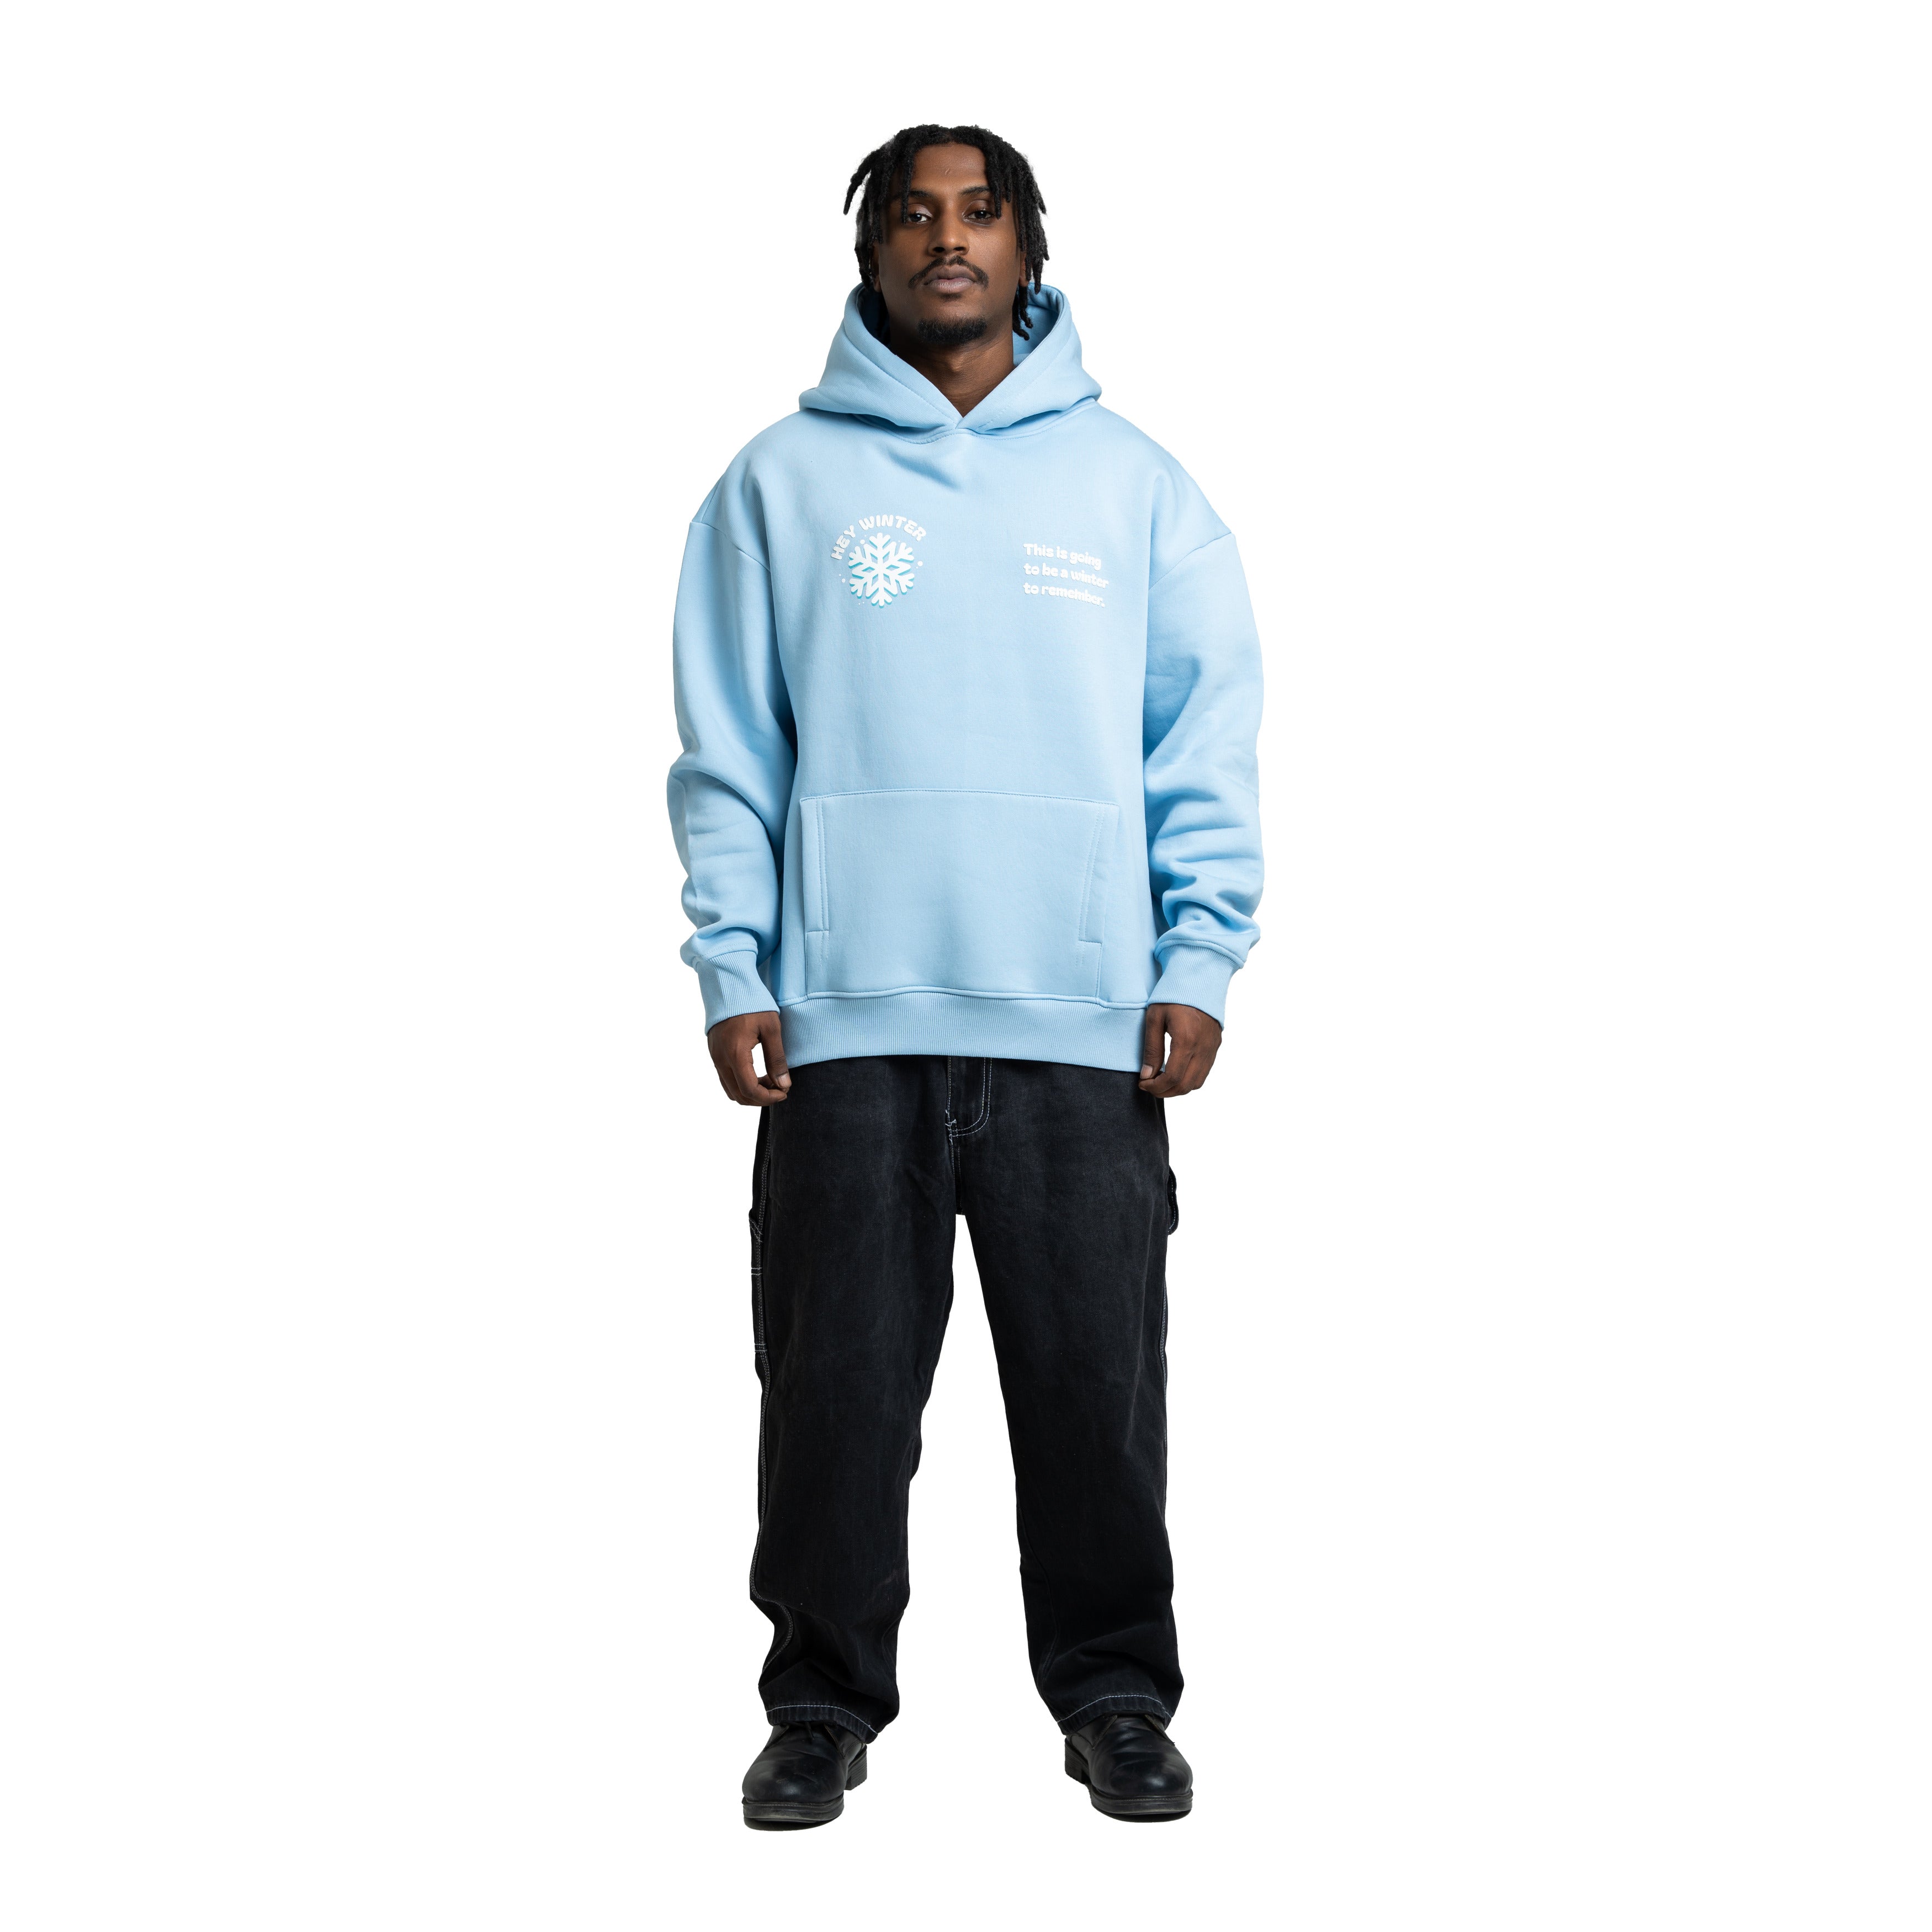 The Pop Up Selectives Snow Hoodie